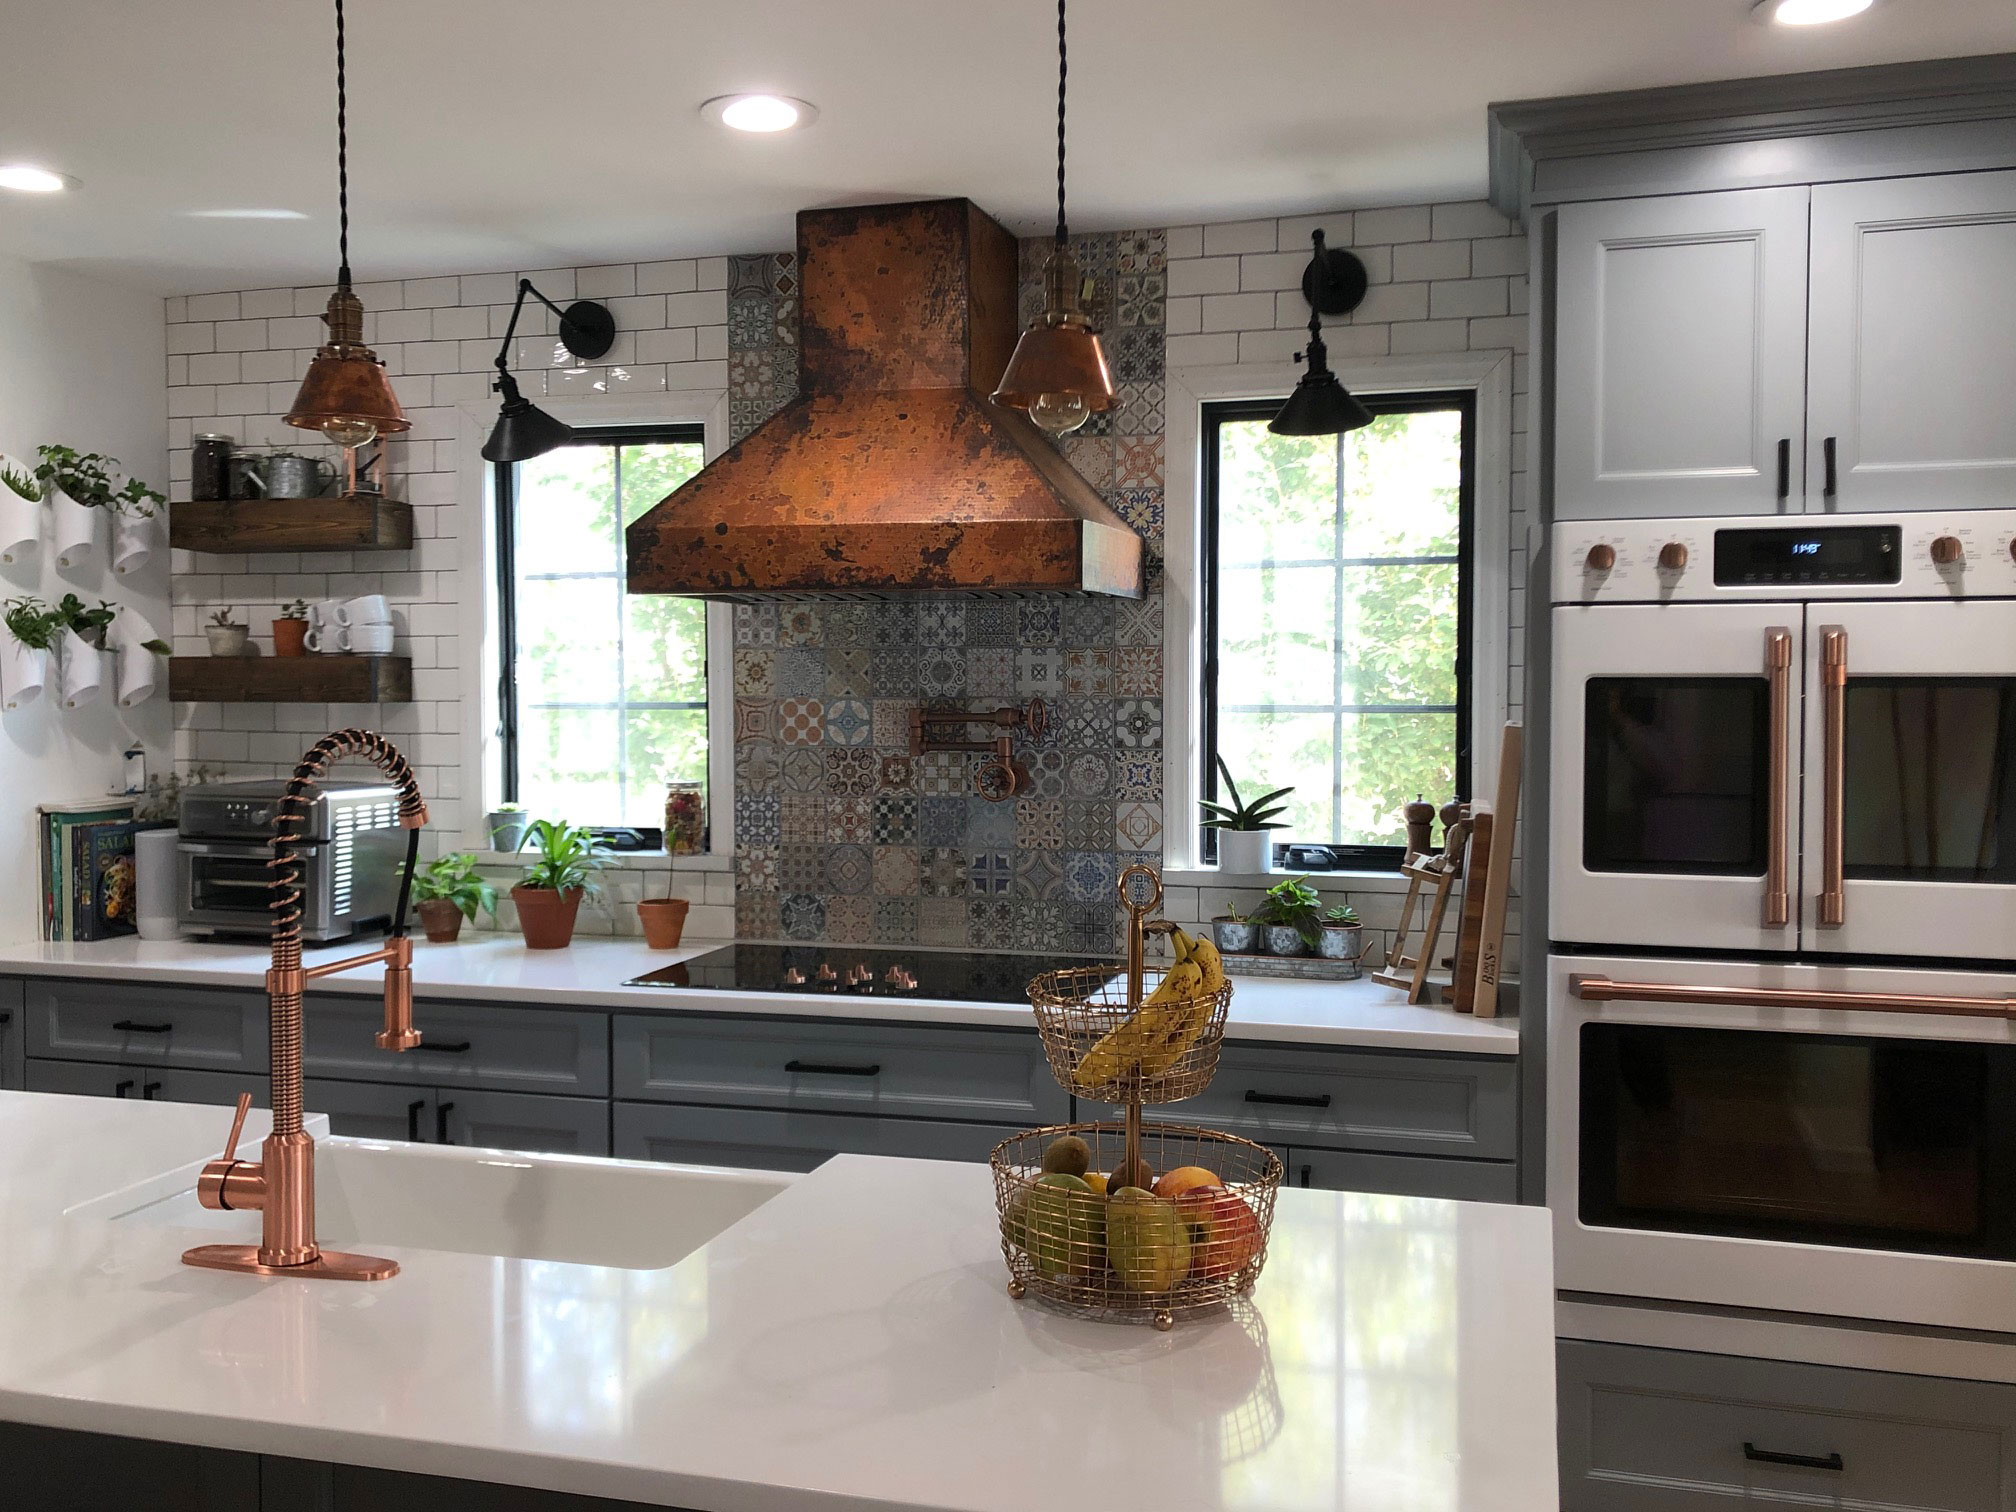 Copper range hood with muted finish in a kitchen with other copper elements. World CopperSmith